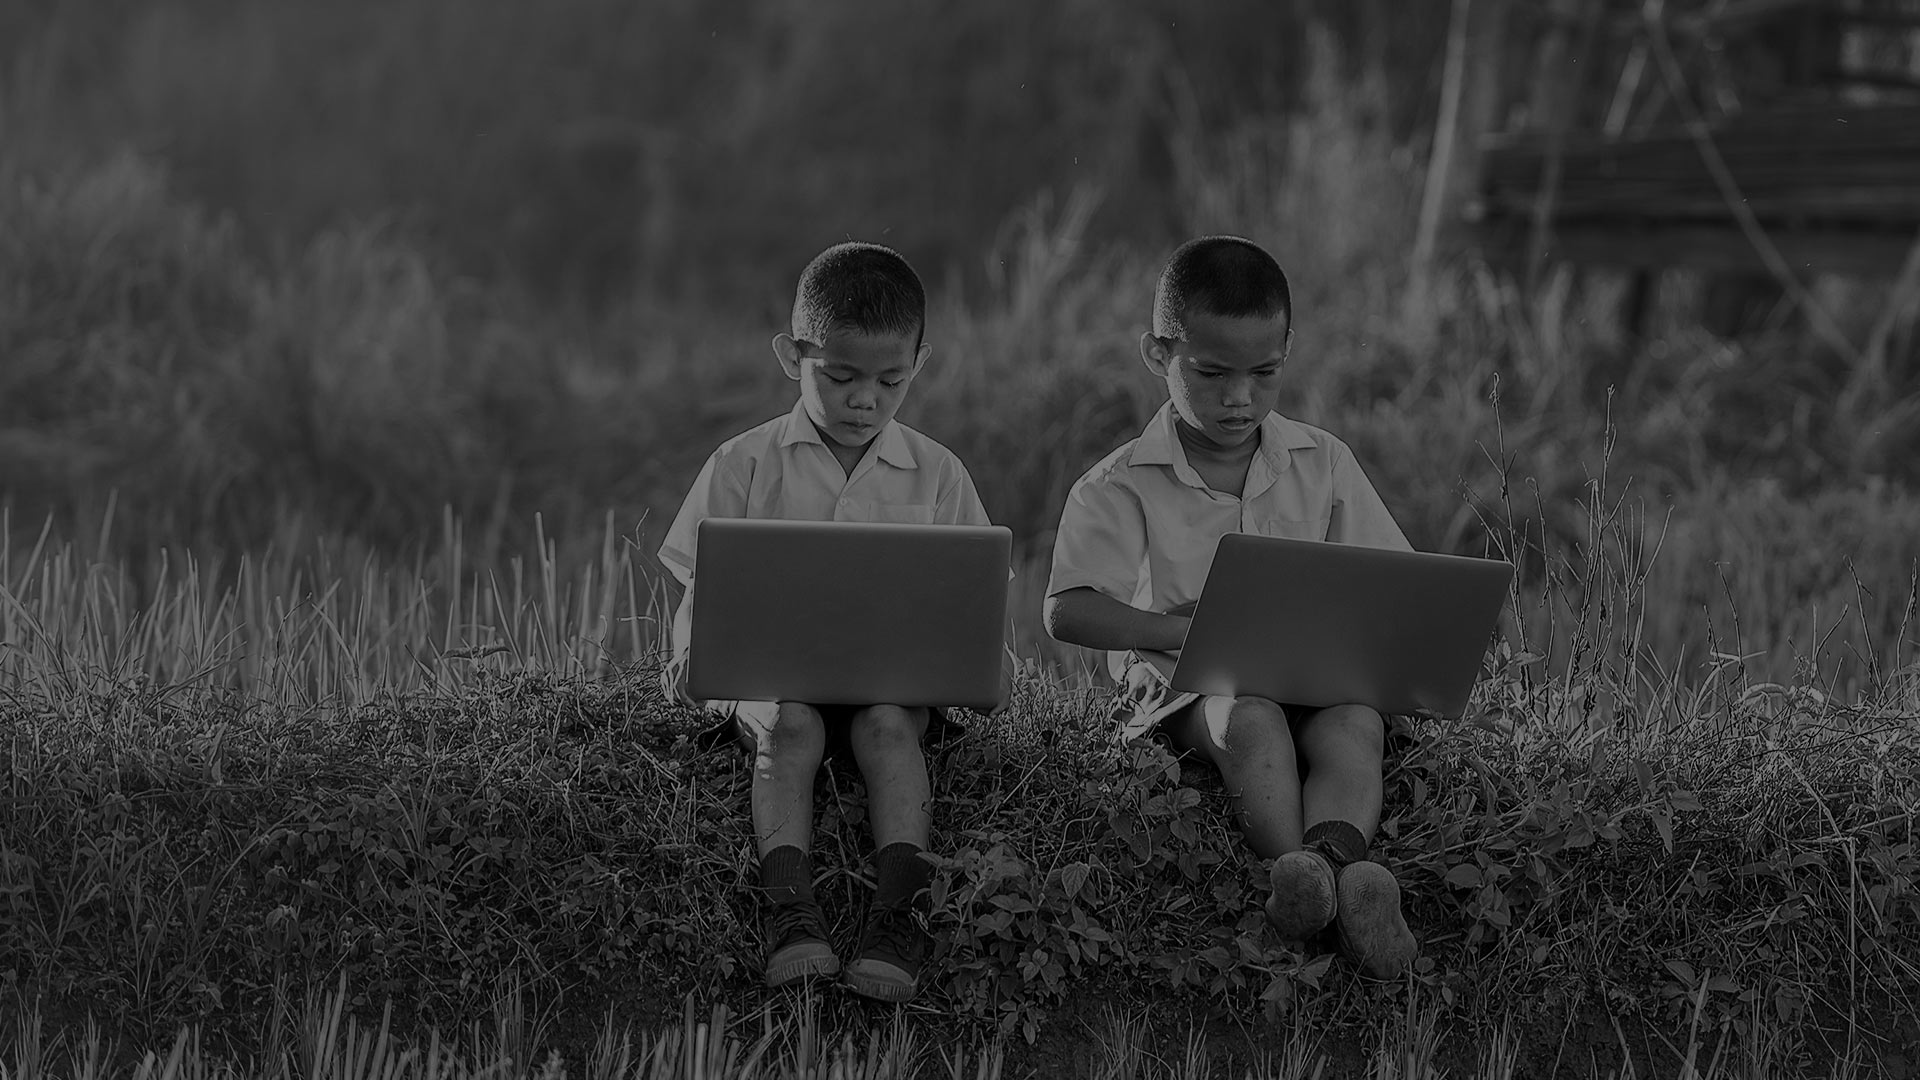 Here to help image - Two boys looking at their laptops.